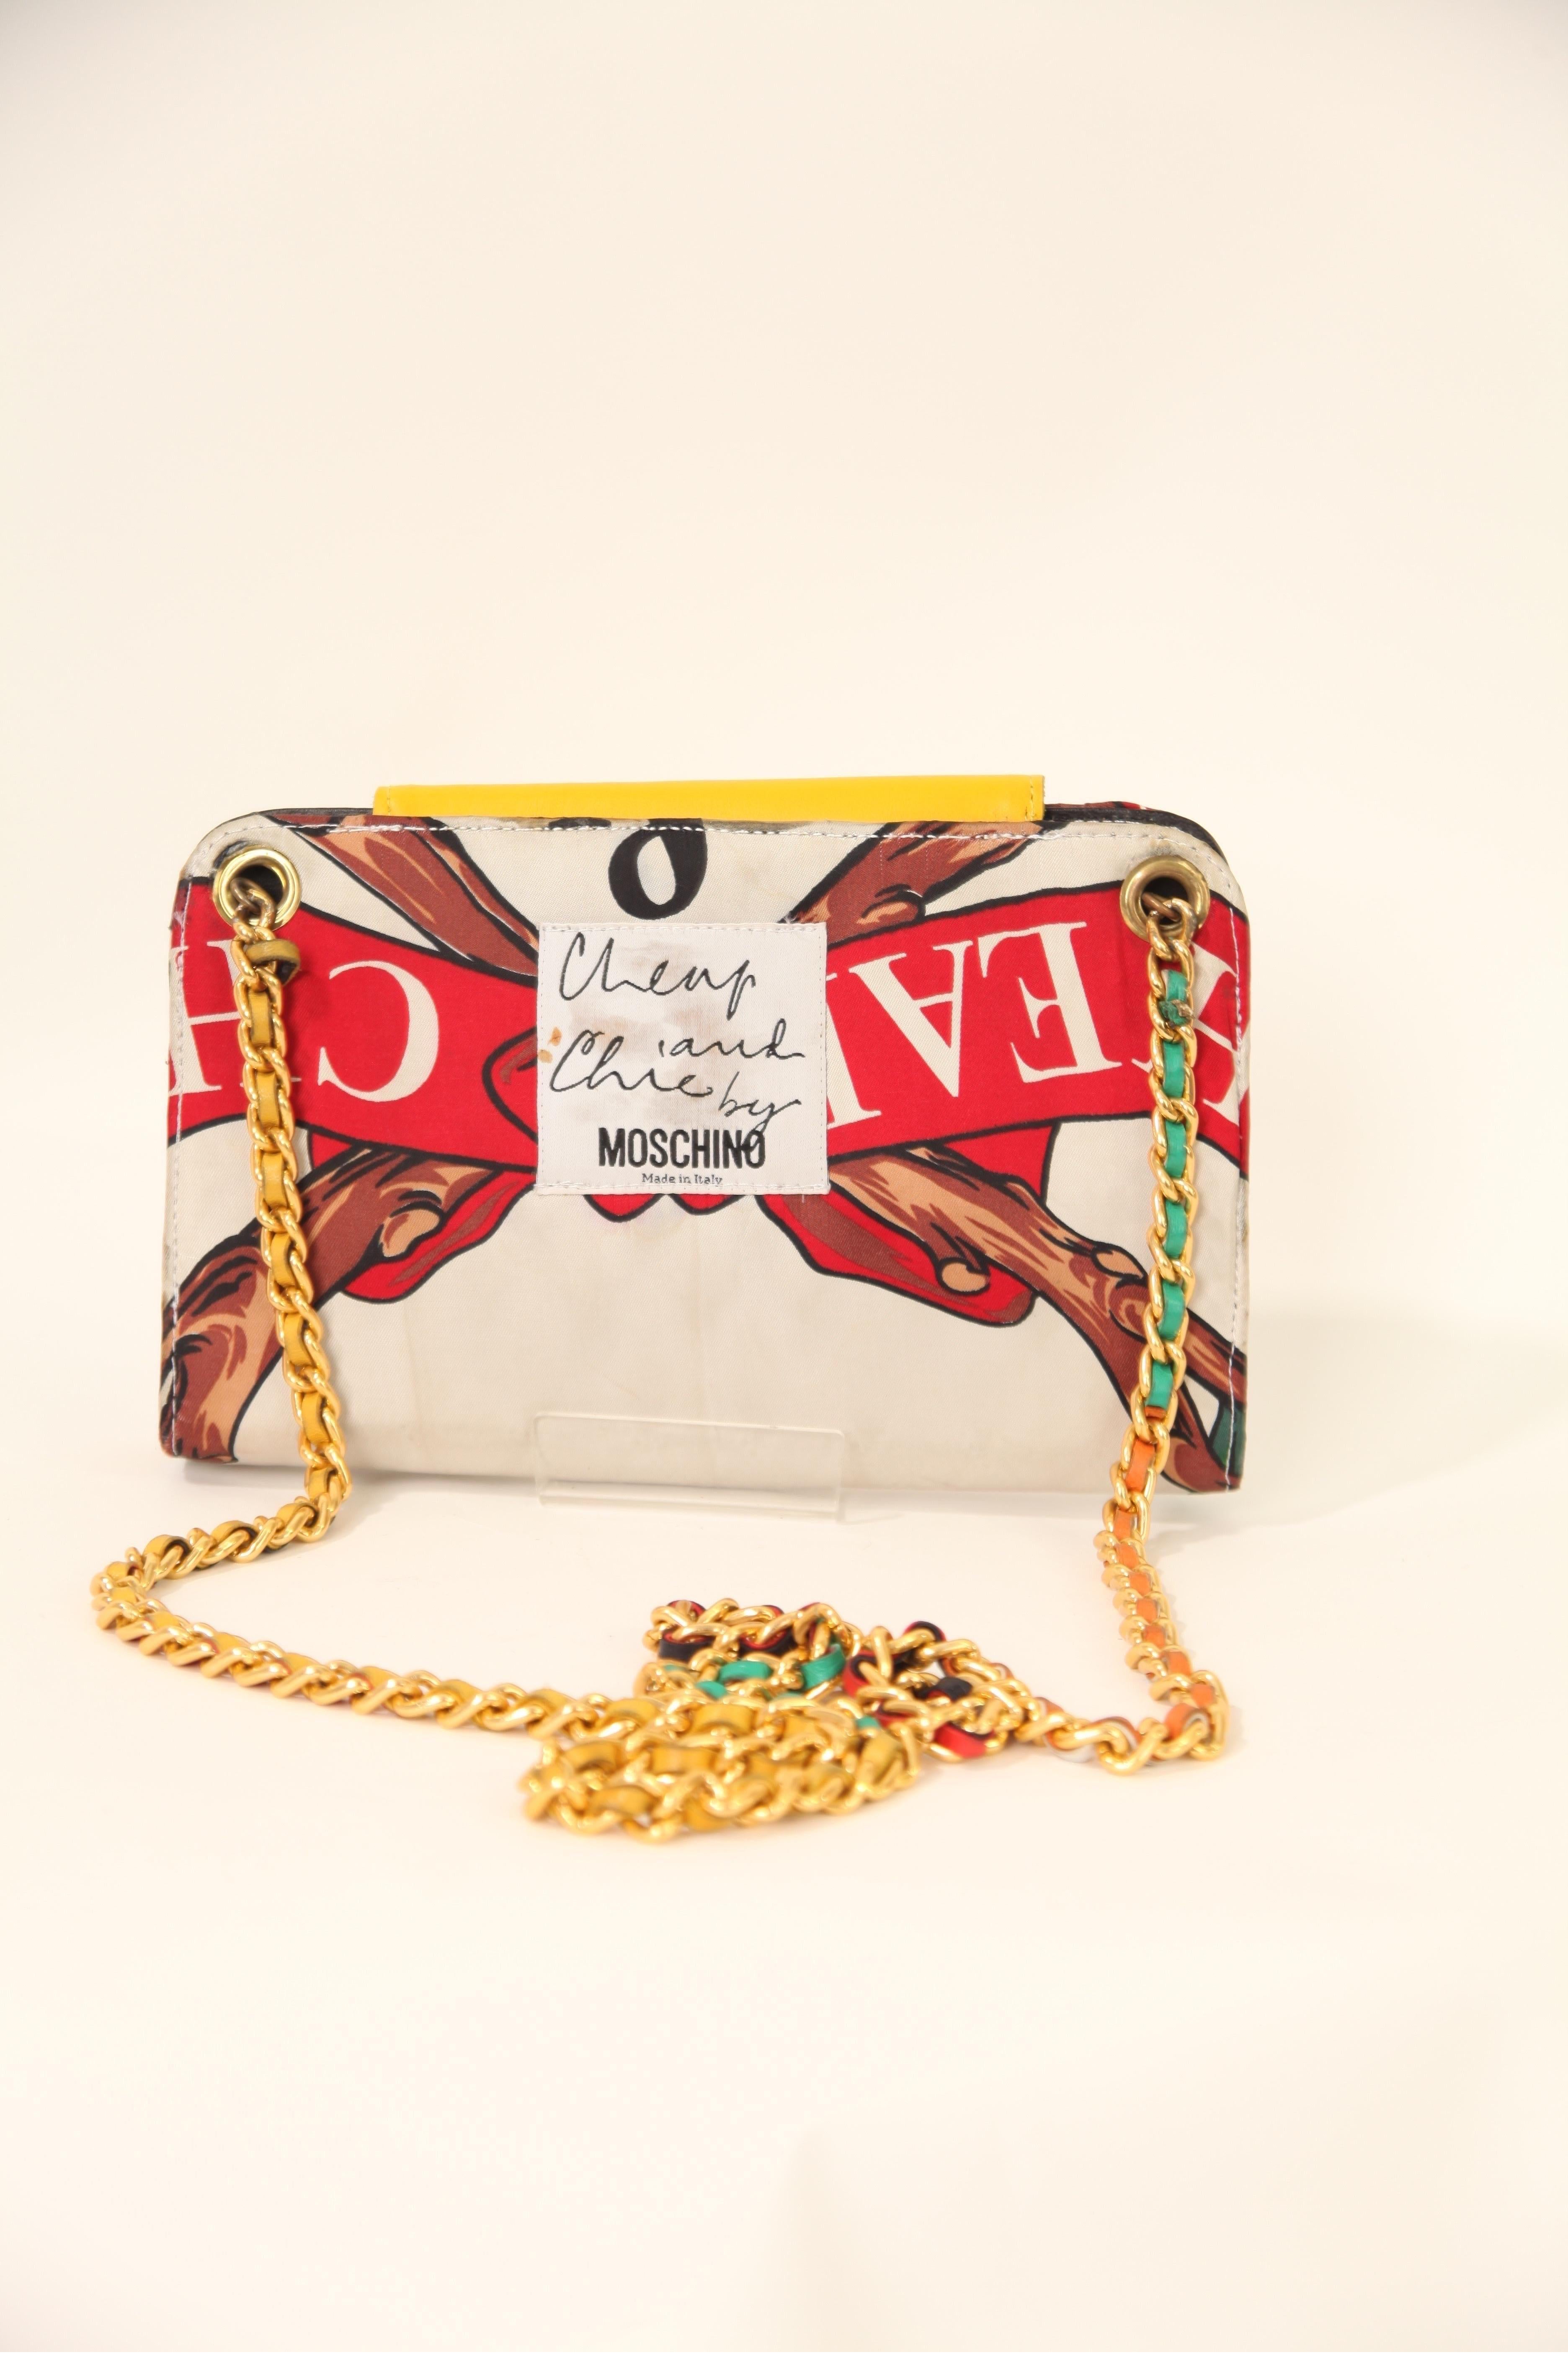 Women's Moschino Cheap and Chic multicolour leather and textiles  clutch bag. C1992 For Sale